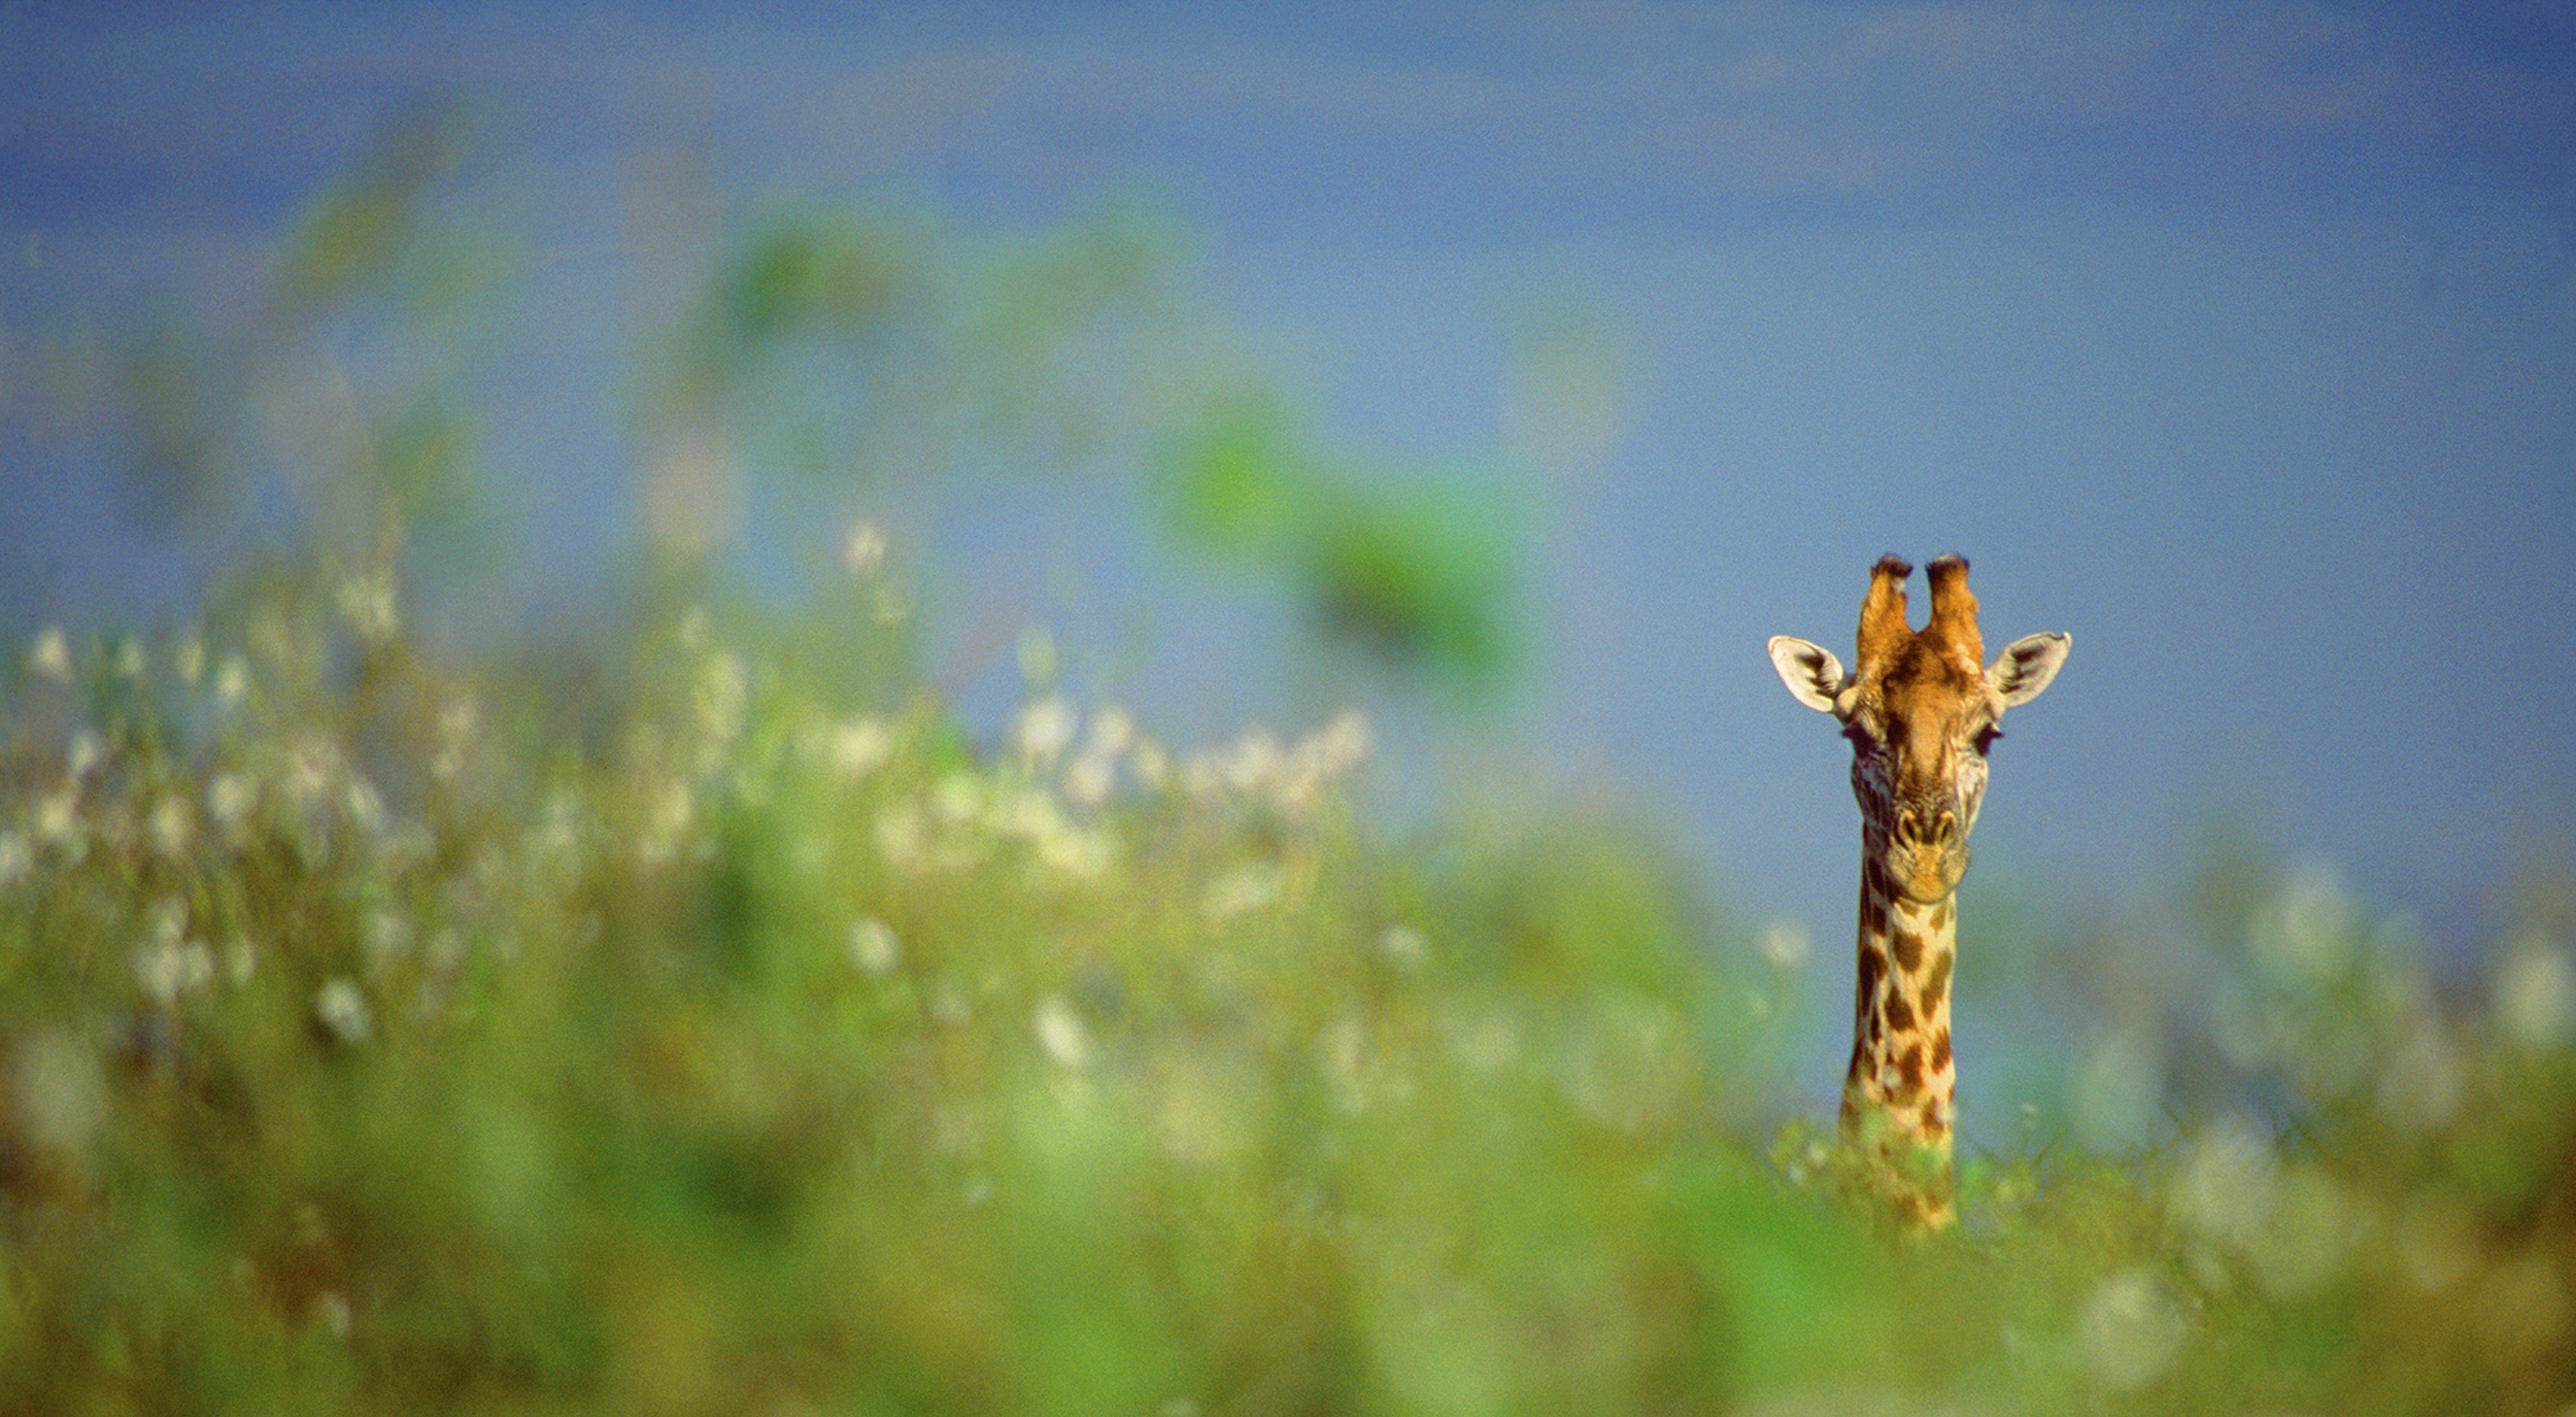 focus on giraffe head and neck looking at camera above bushes and trees blurred in the foreground